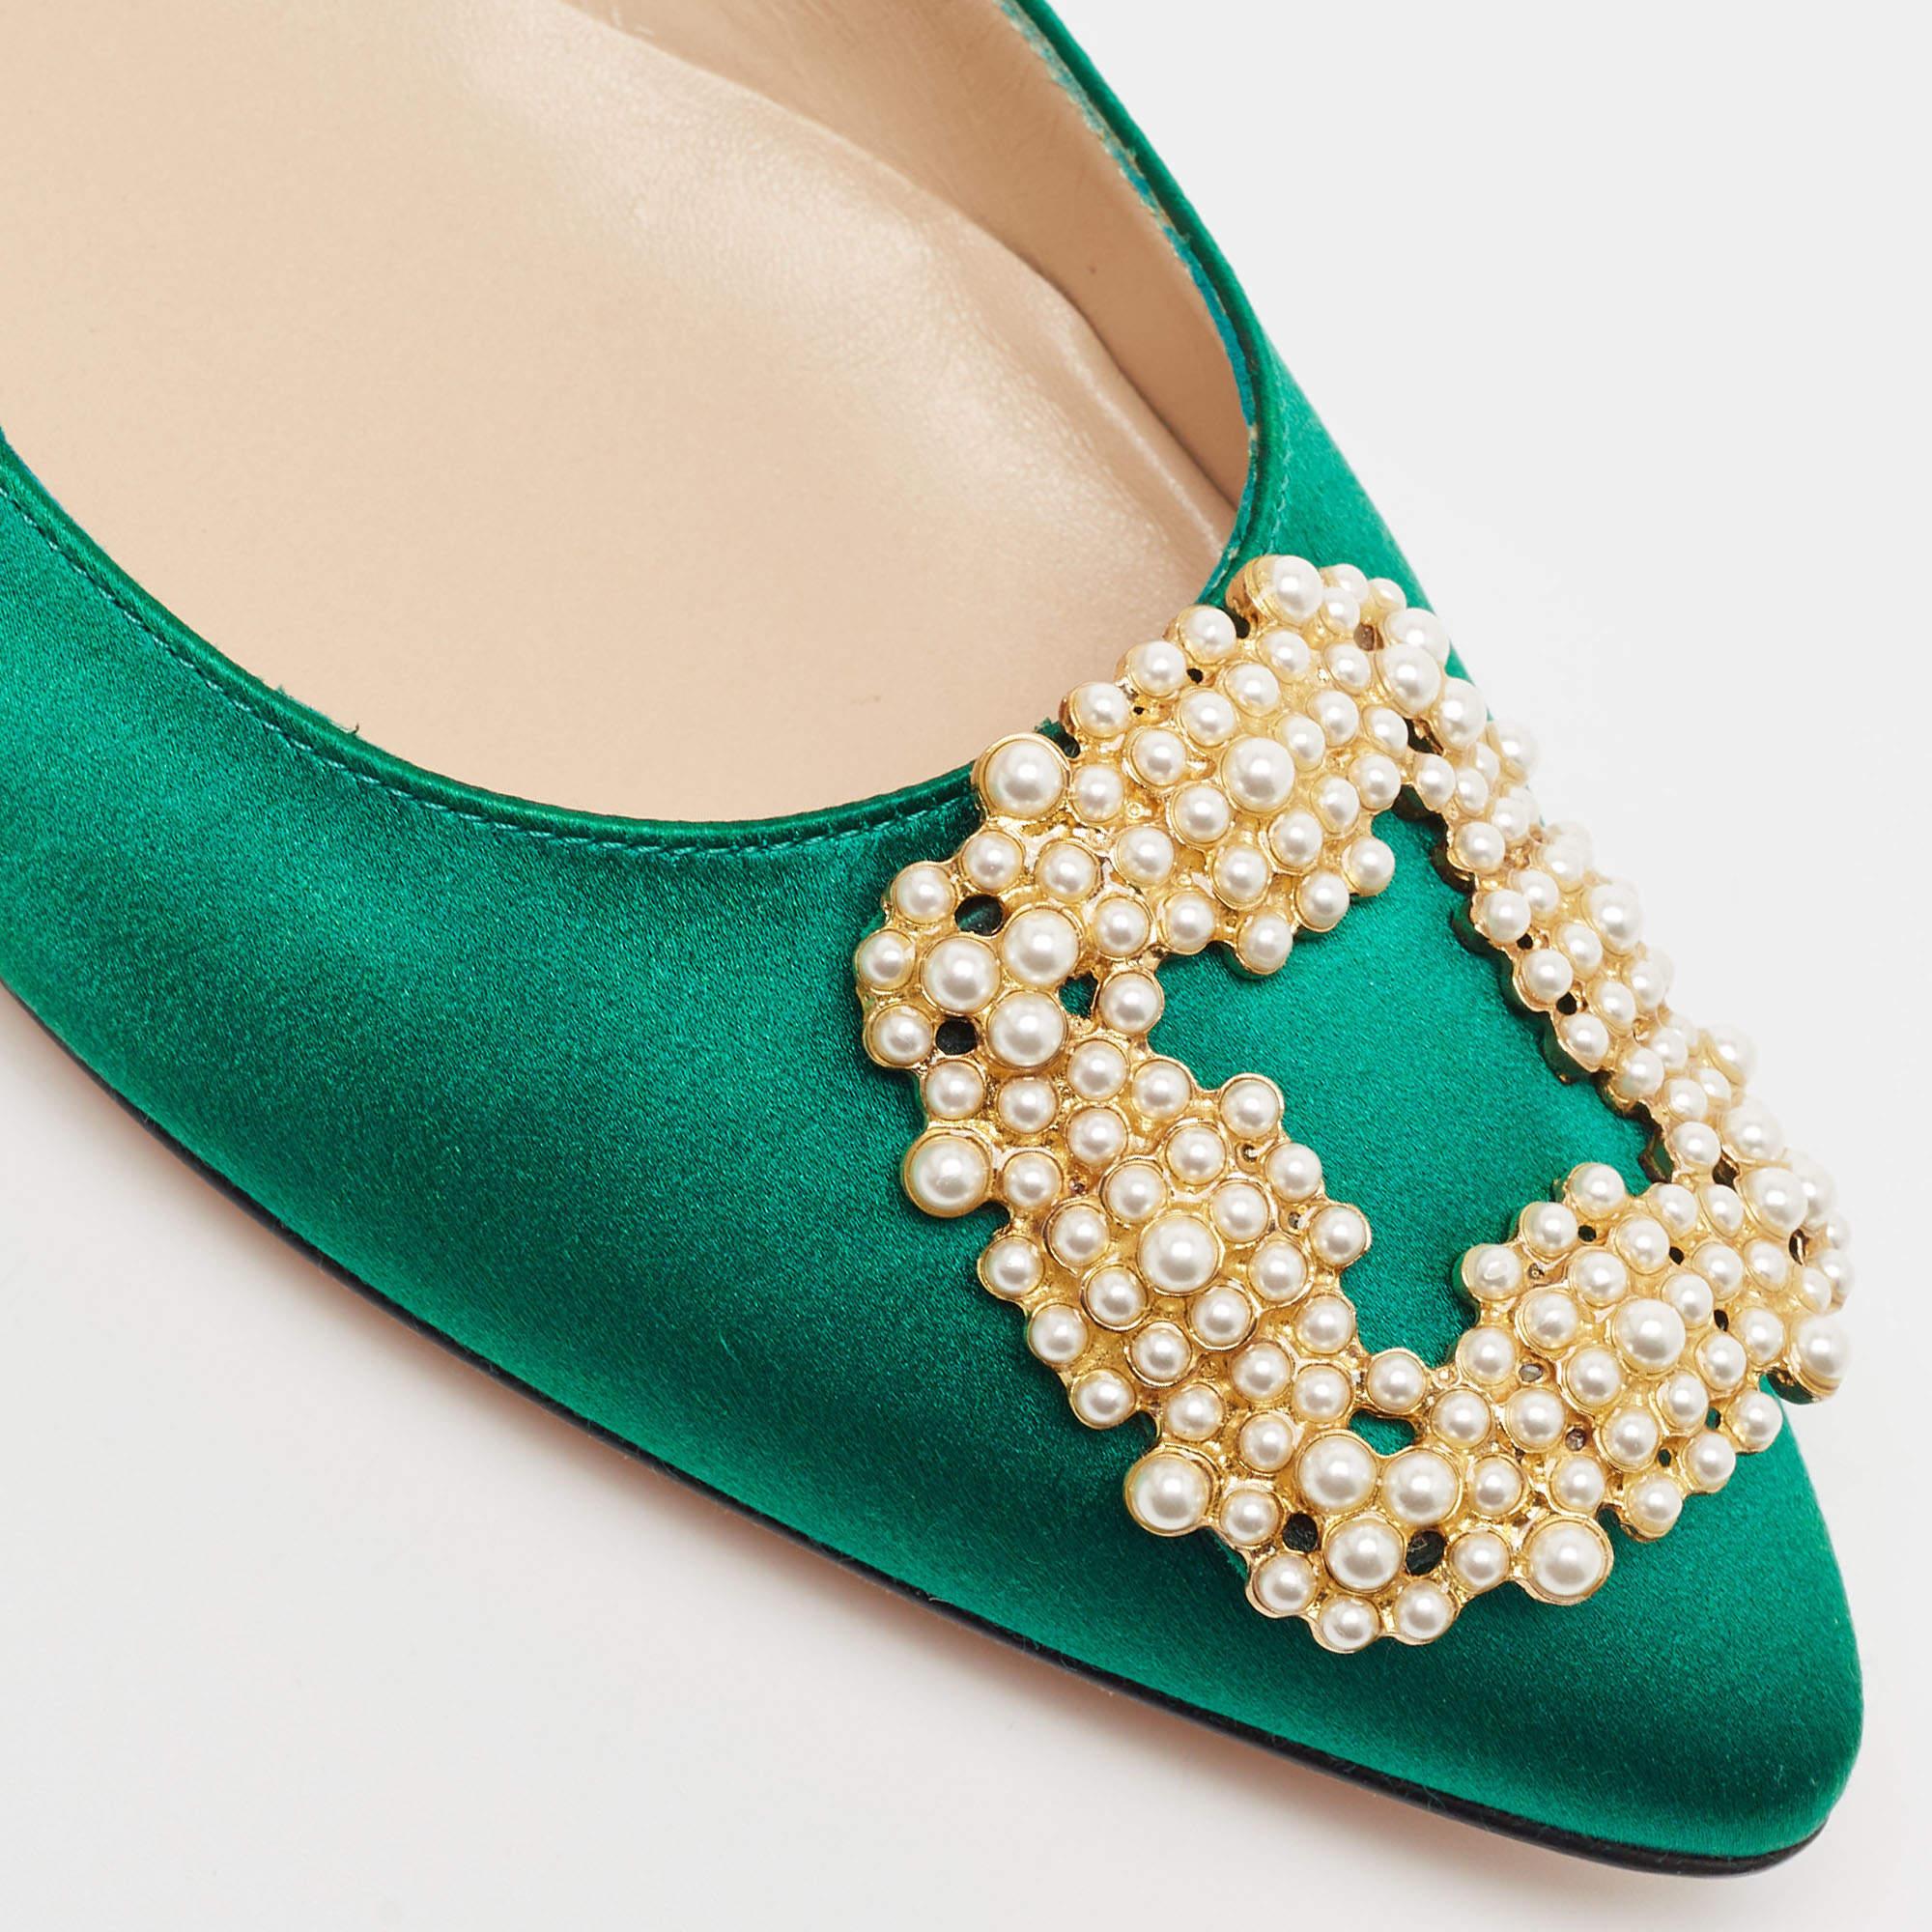 These Hangisi ballet flats are crafted from satin in a green shade into a pointed-toe silhouette augmented by the embellishments perched on the uppers.

Includes: Original Dustbag, Original Box